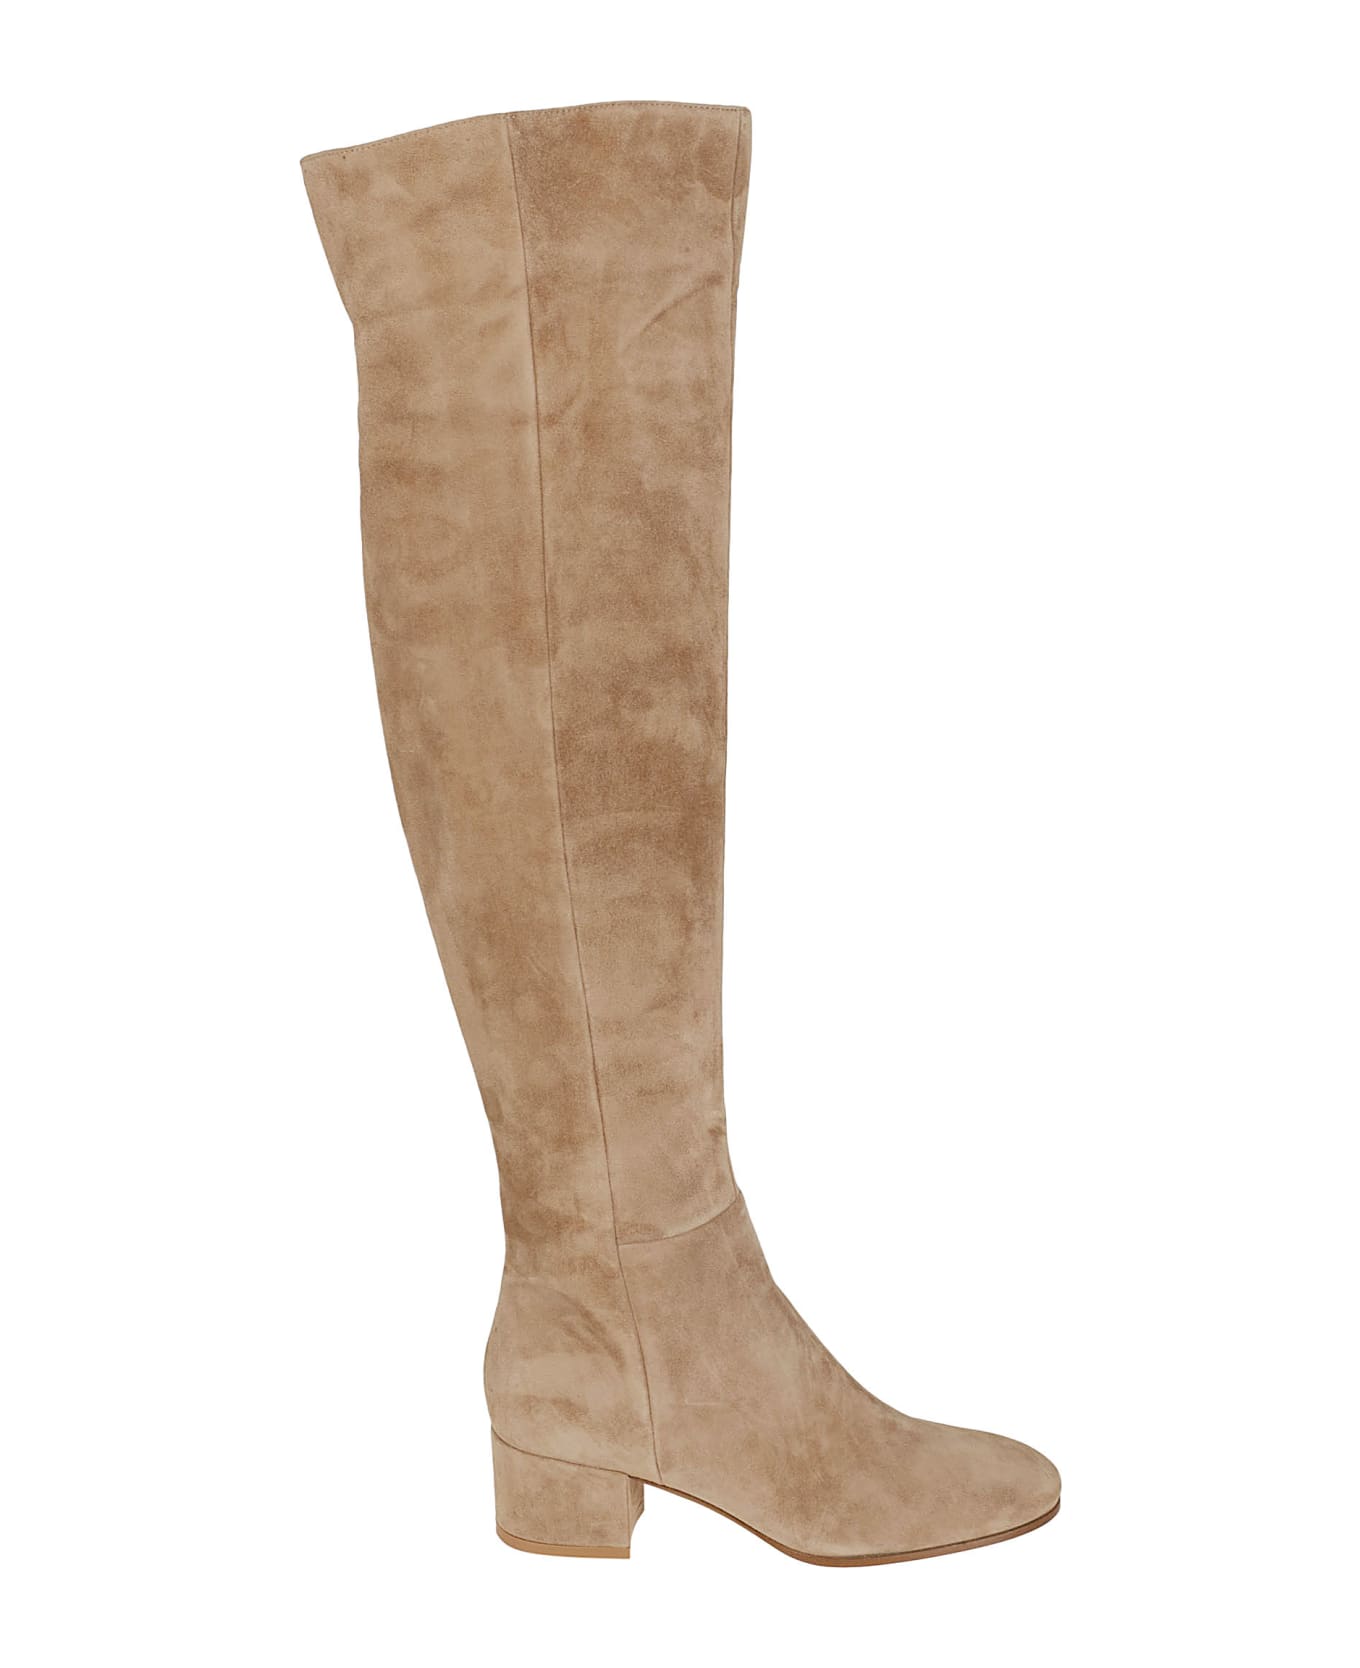 Gianvito Rossi Rolling Mid Camel Over-the-knee Boots - Camel